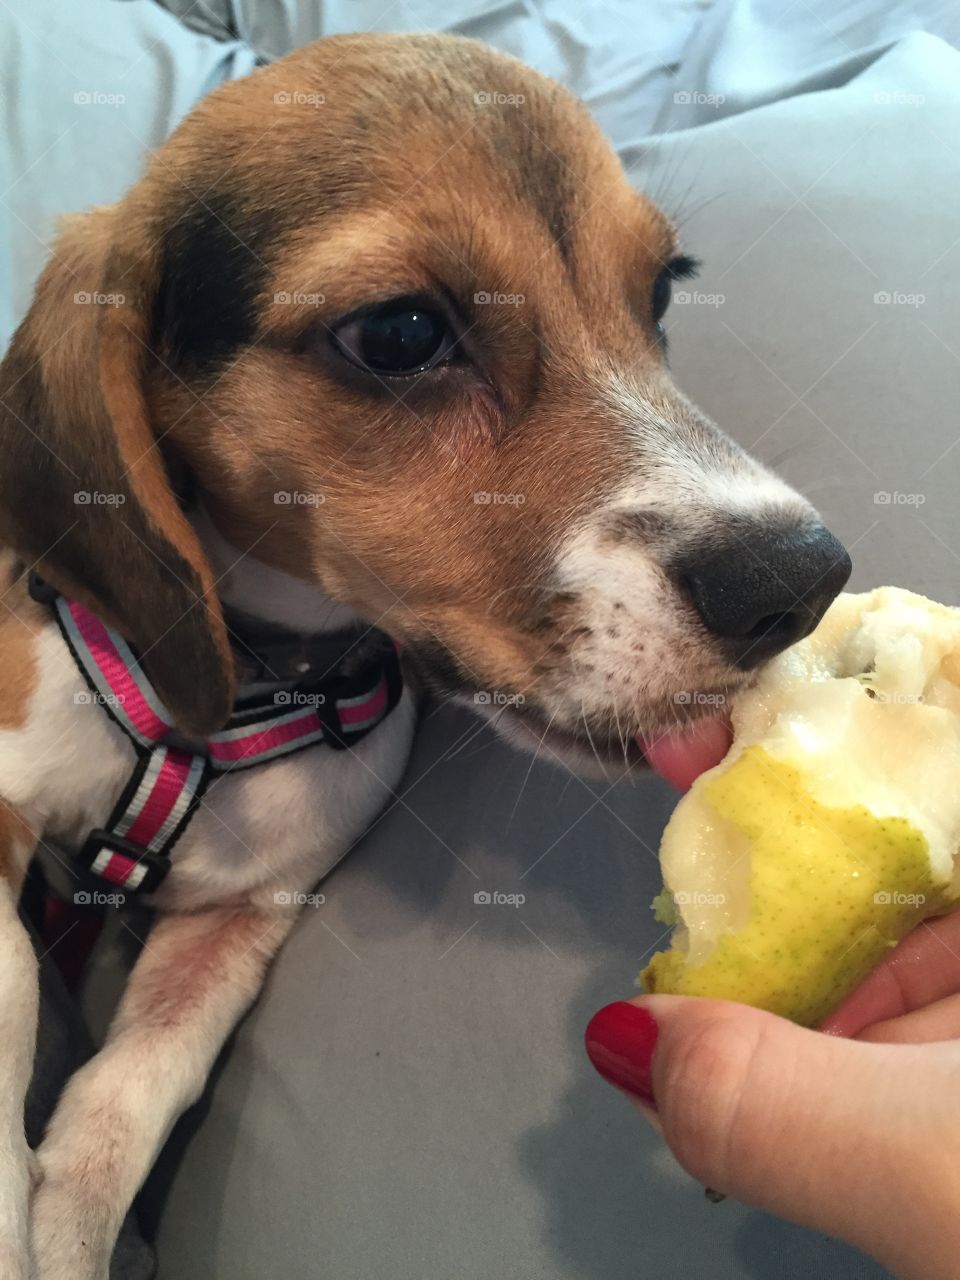 Puppy Pear. Puppy at sisters. Sister gives her fruit to try. She loves pears!